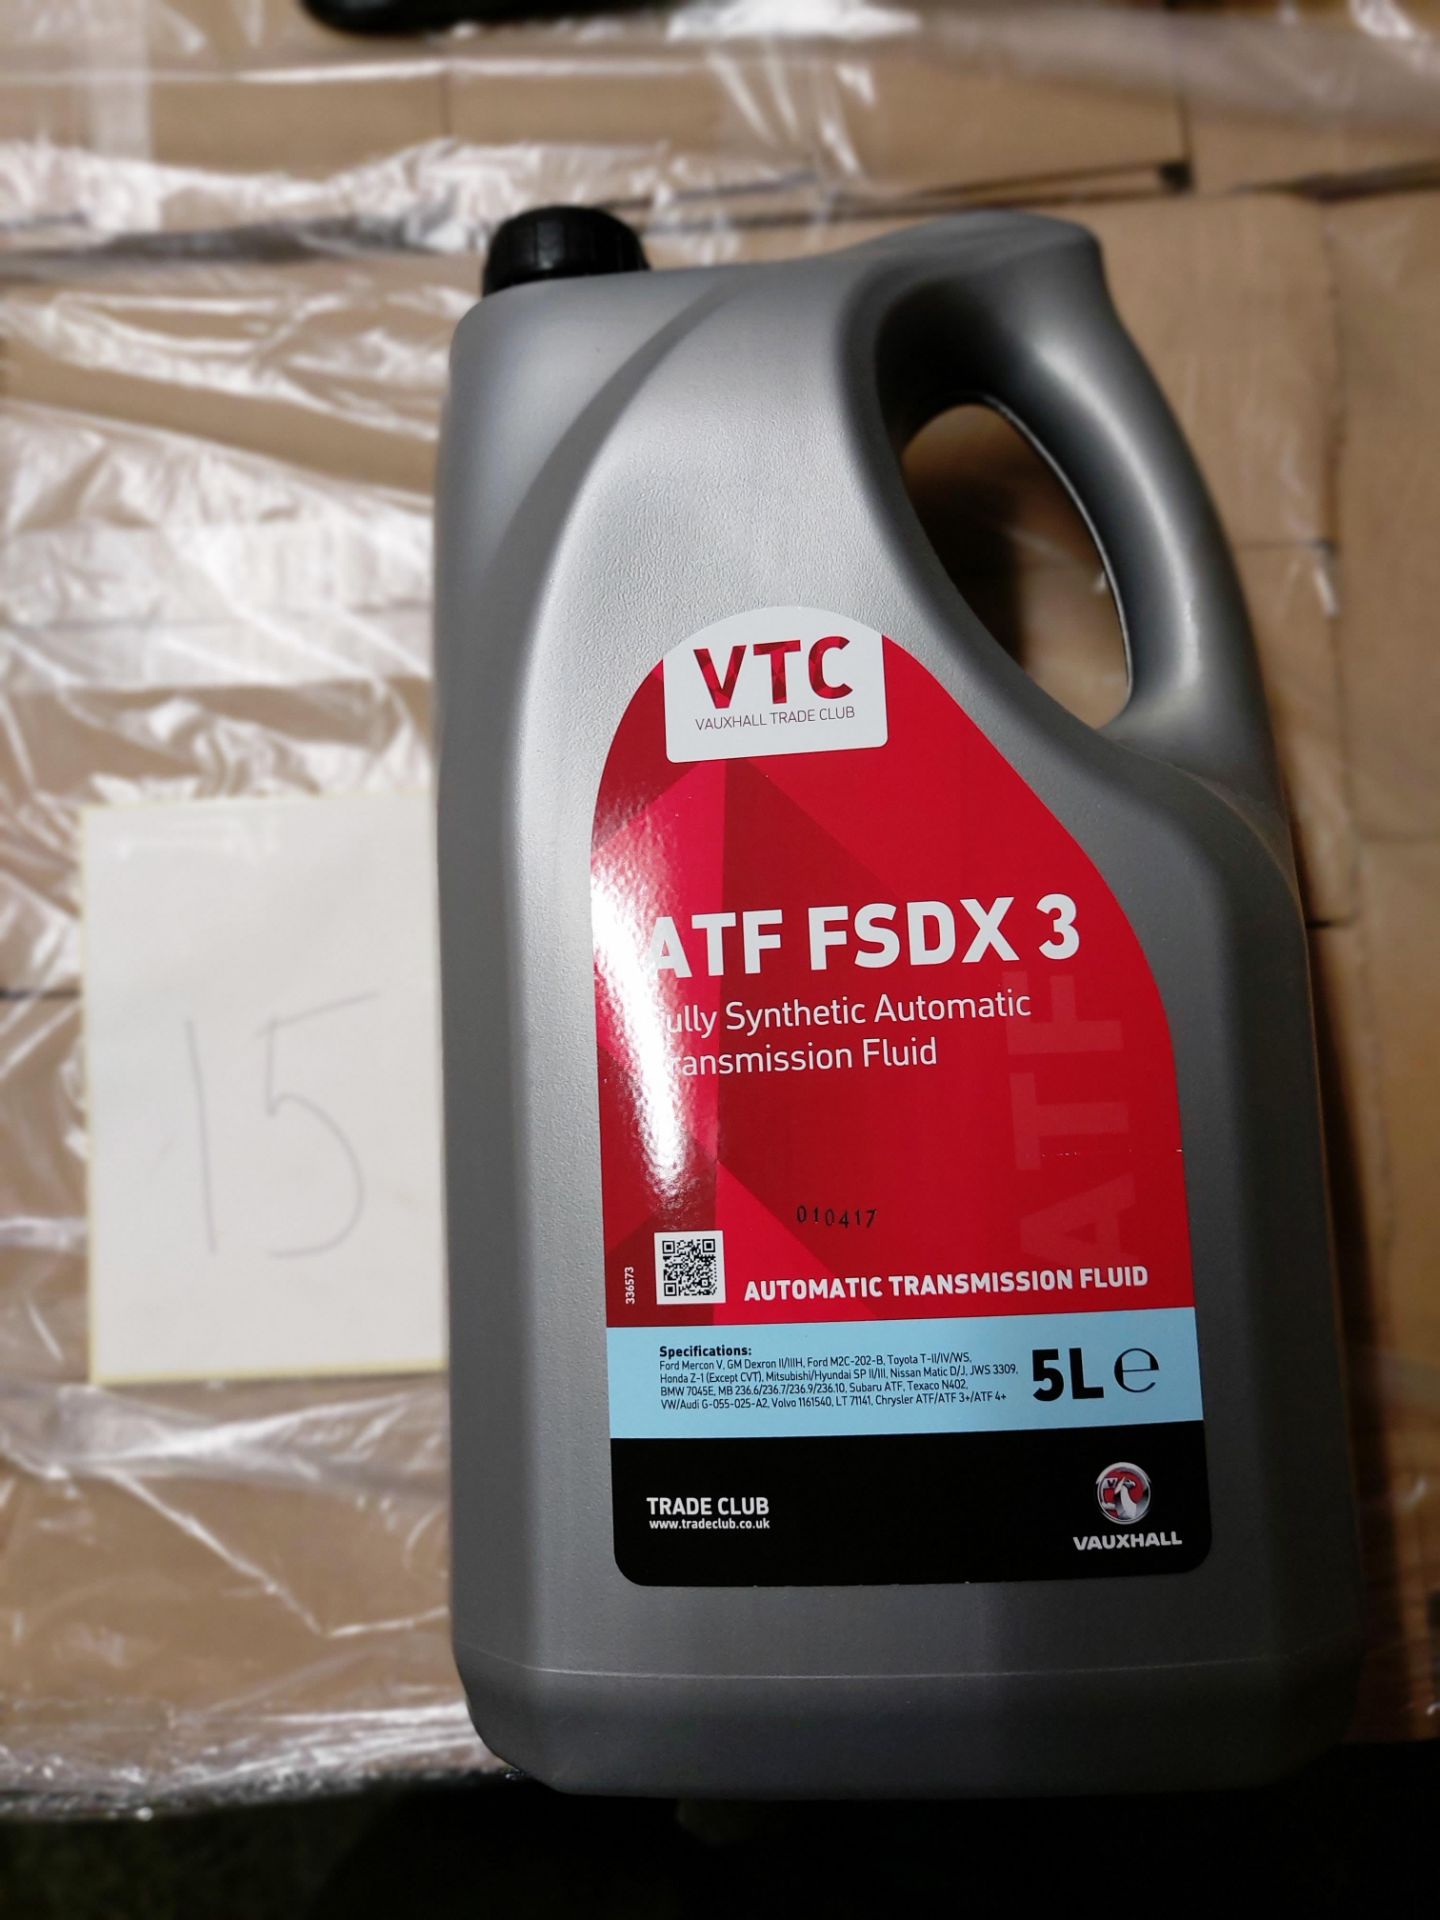 76 x 5 litre tubs of VTC ATF-FSDX 3 fully synthetic automatic transmission fluid on 1 pallet (pallet